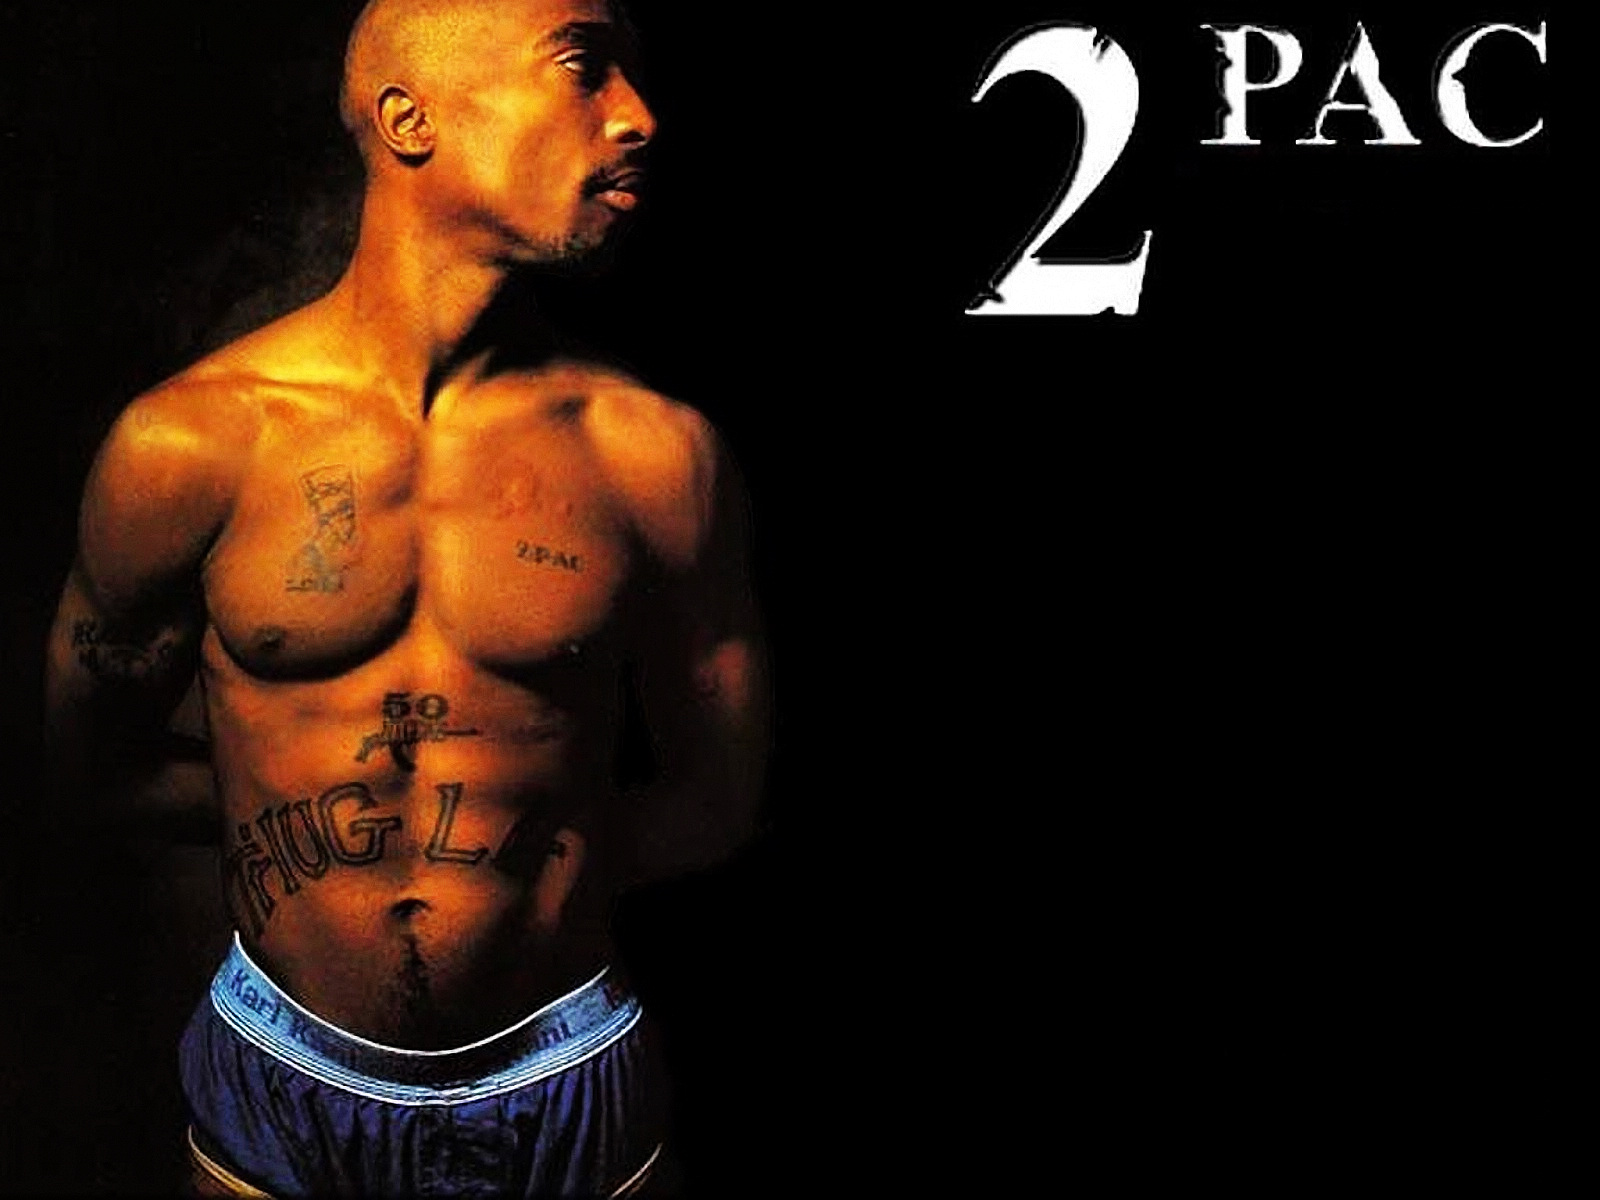 2pac Wallpaper Pictures